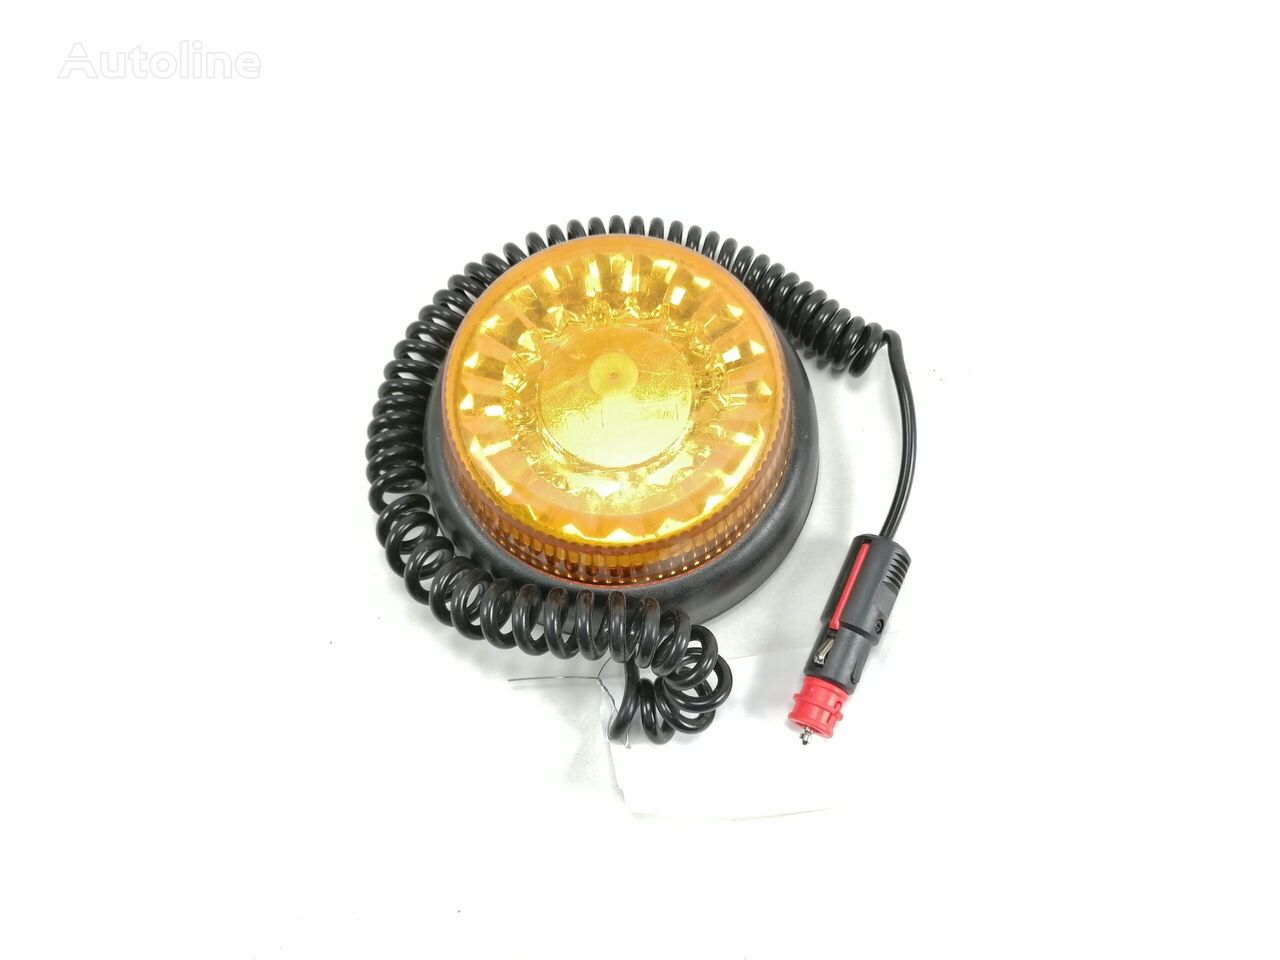 Scania LED flasher LED28watt relay for Scania truck tractor